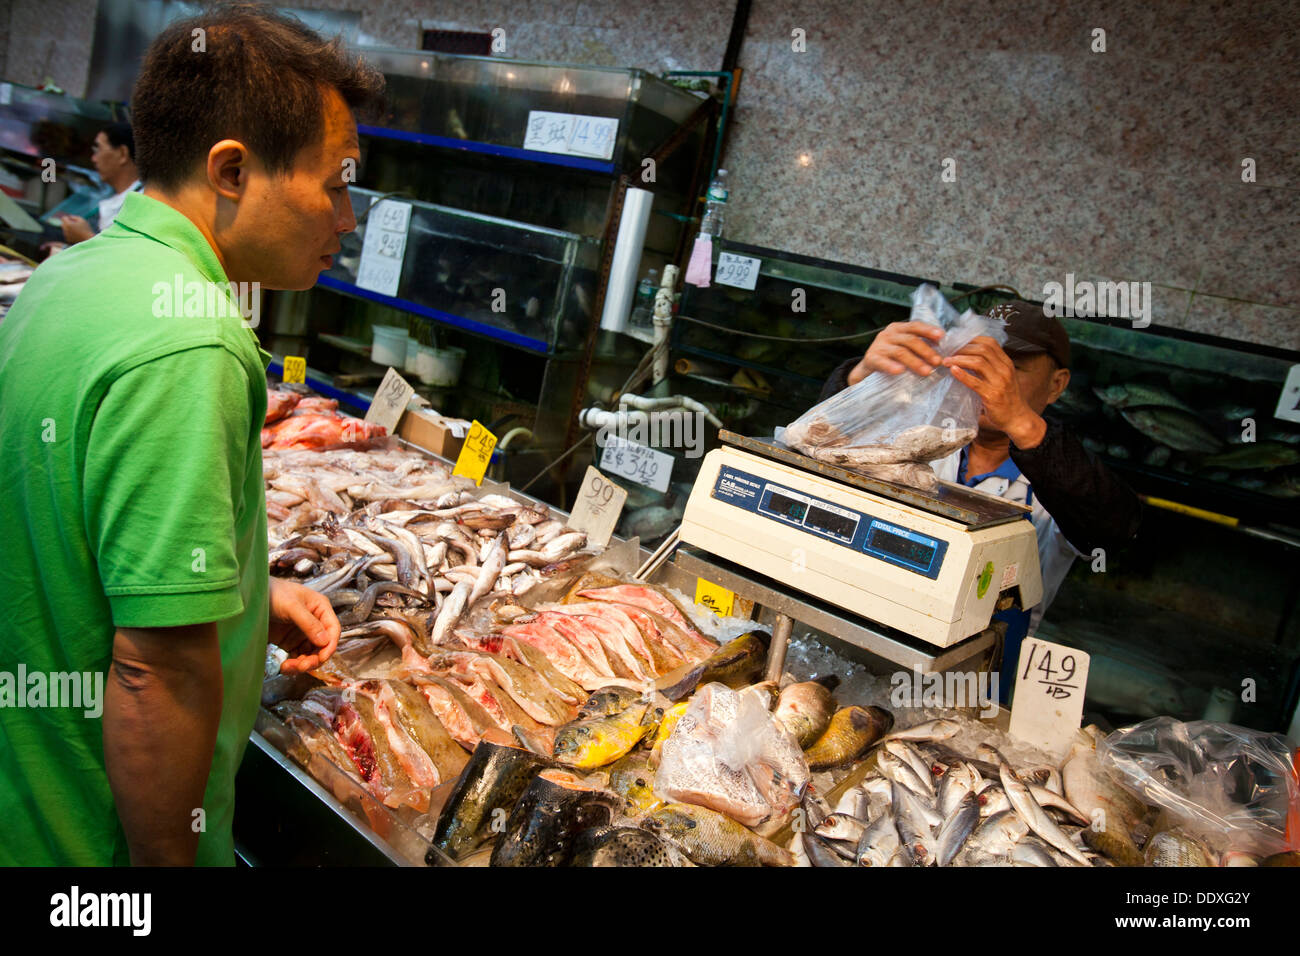 Fish and seafood market, East Broadway, Chinatown, New York, United States of America Stock Photo